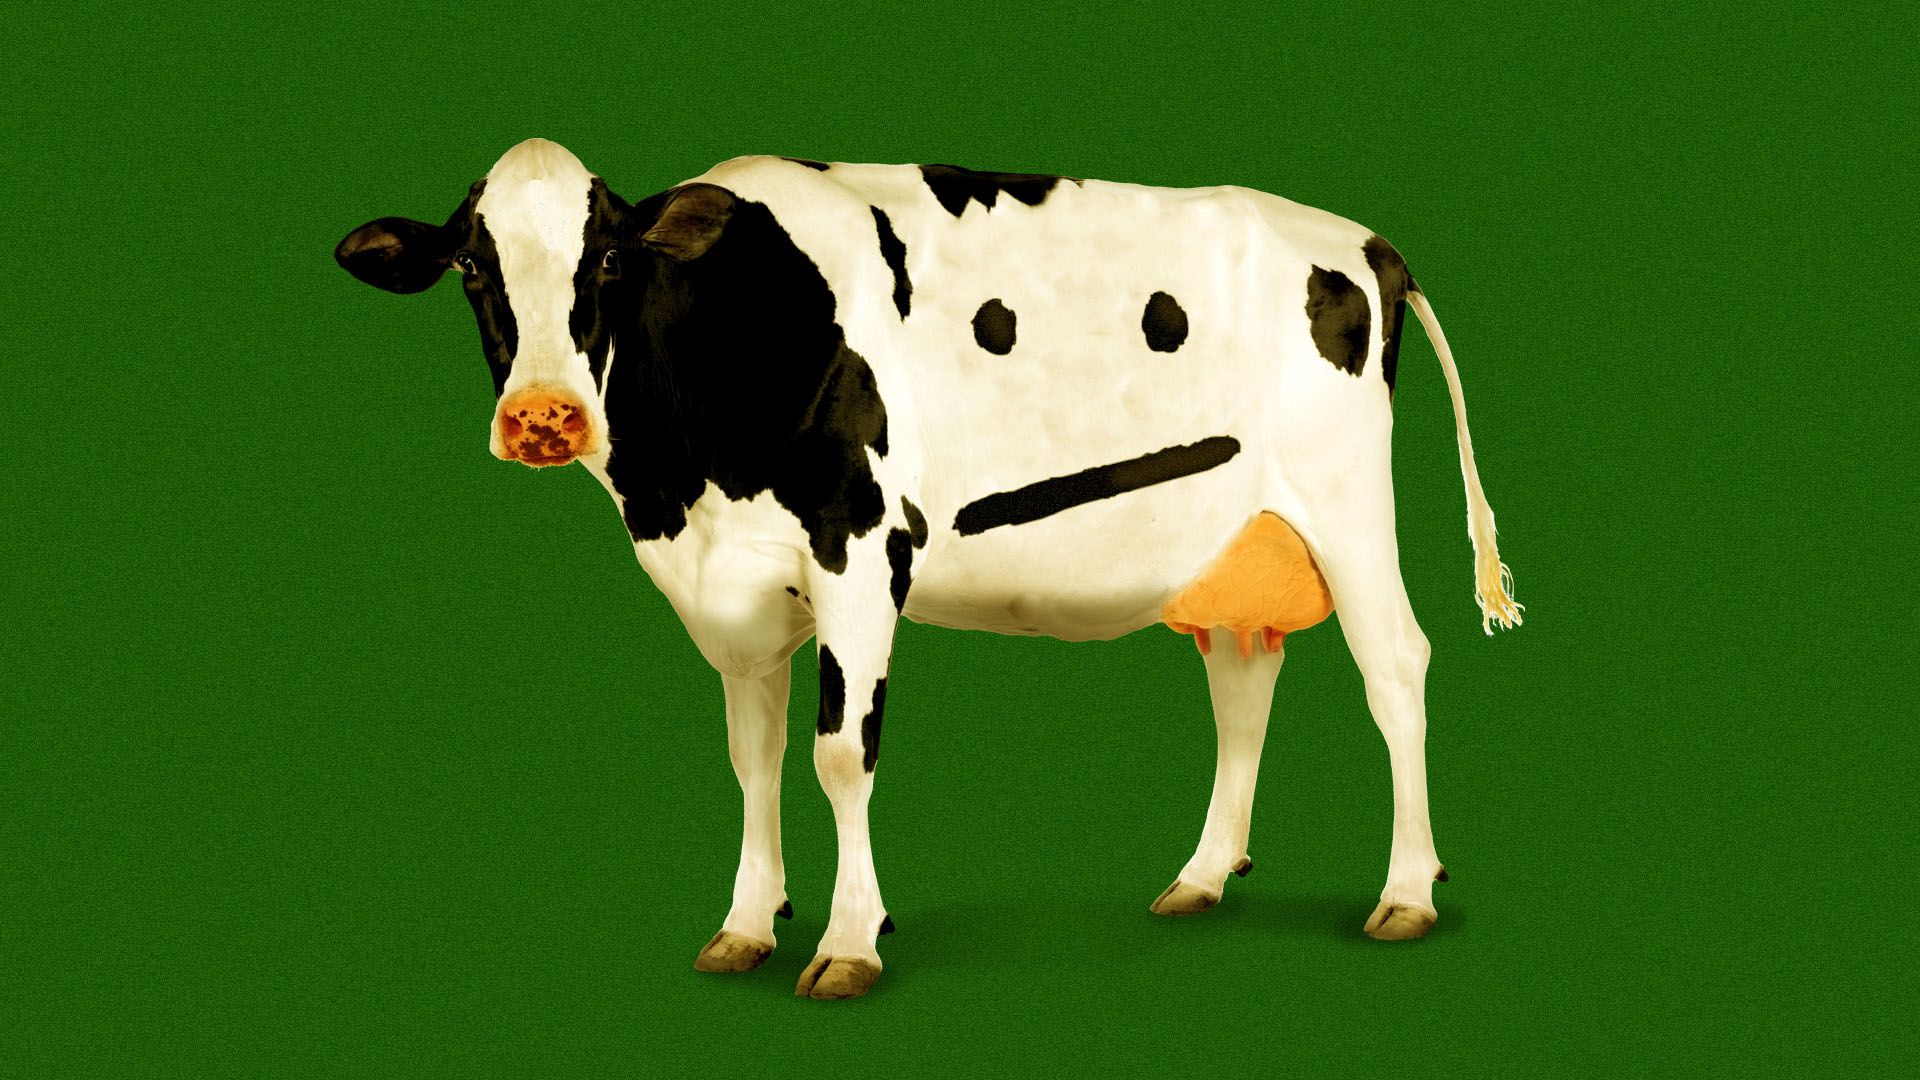 Illustration of a cow with markings in the shape of a neutral face.